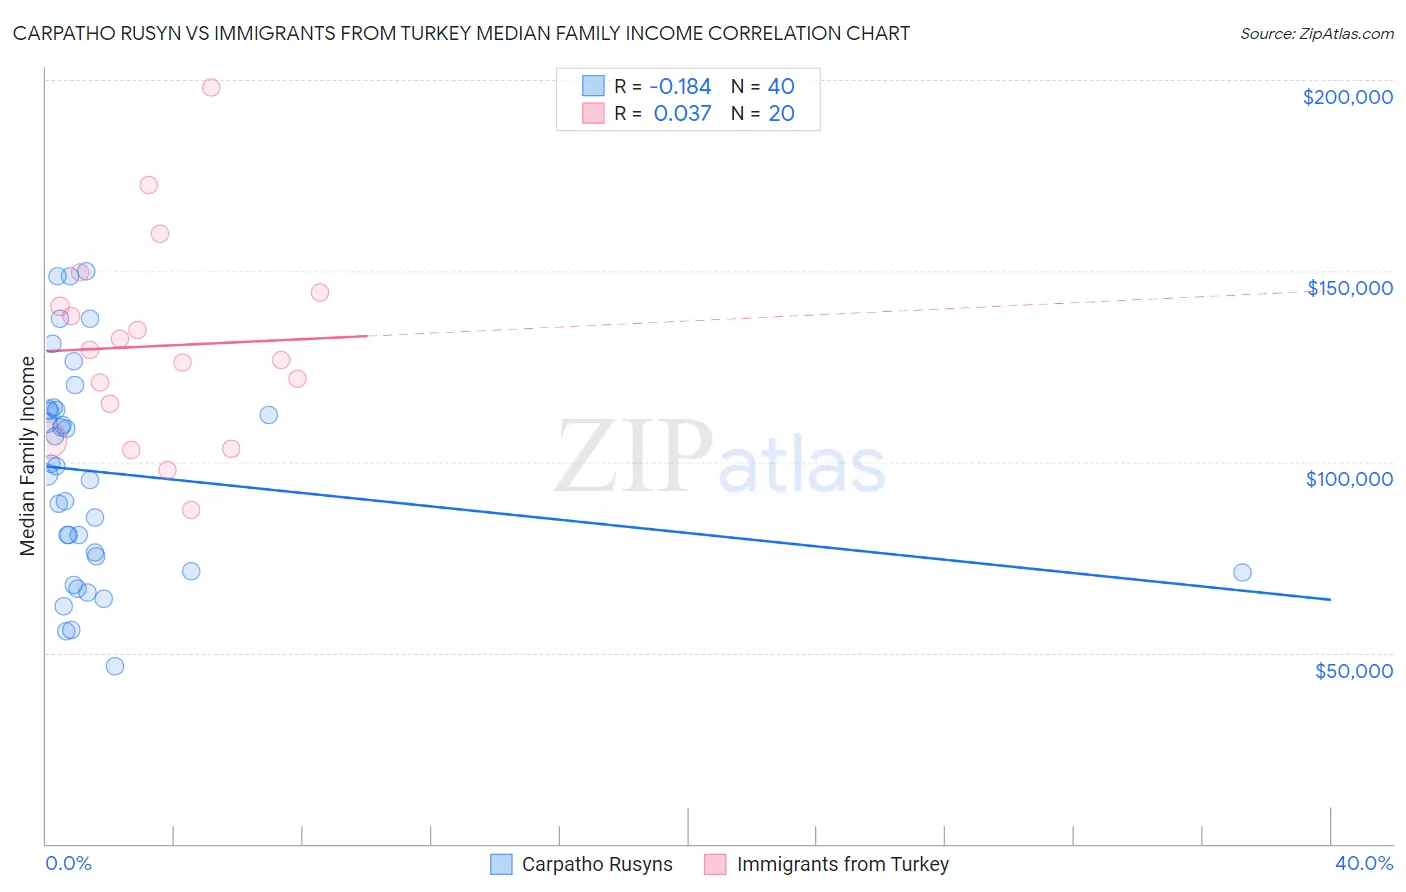 Carpatho Rusyn vs Immigrants from Turkey Median Family Income